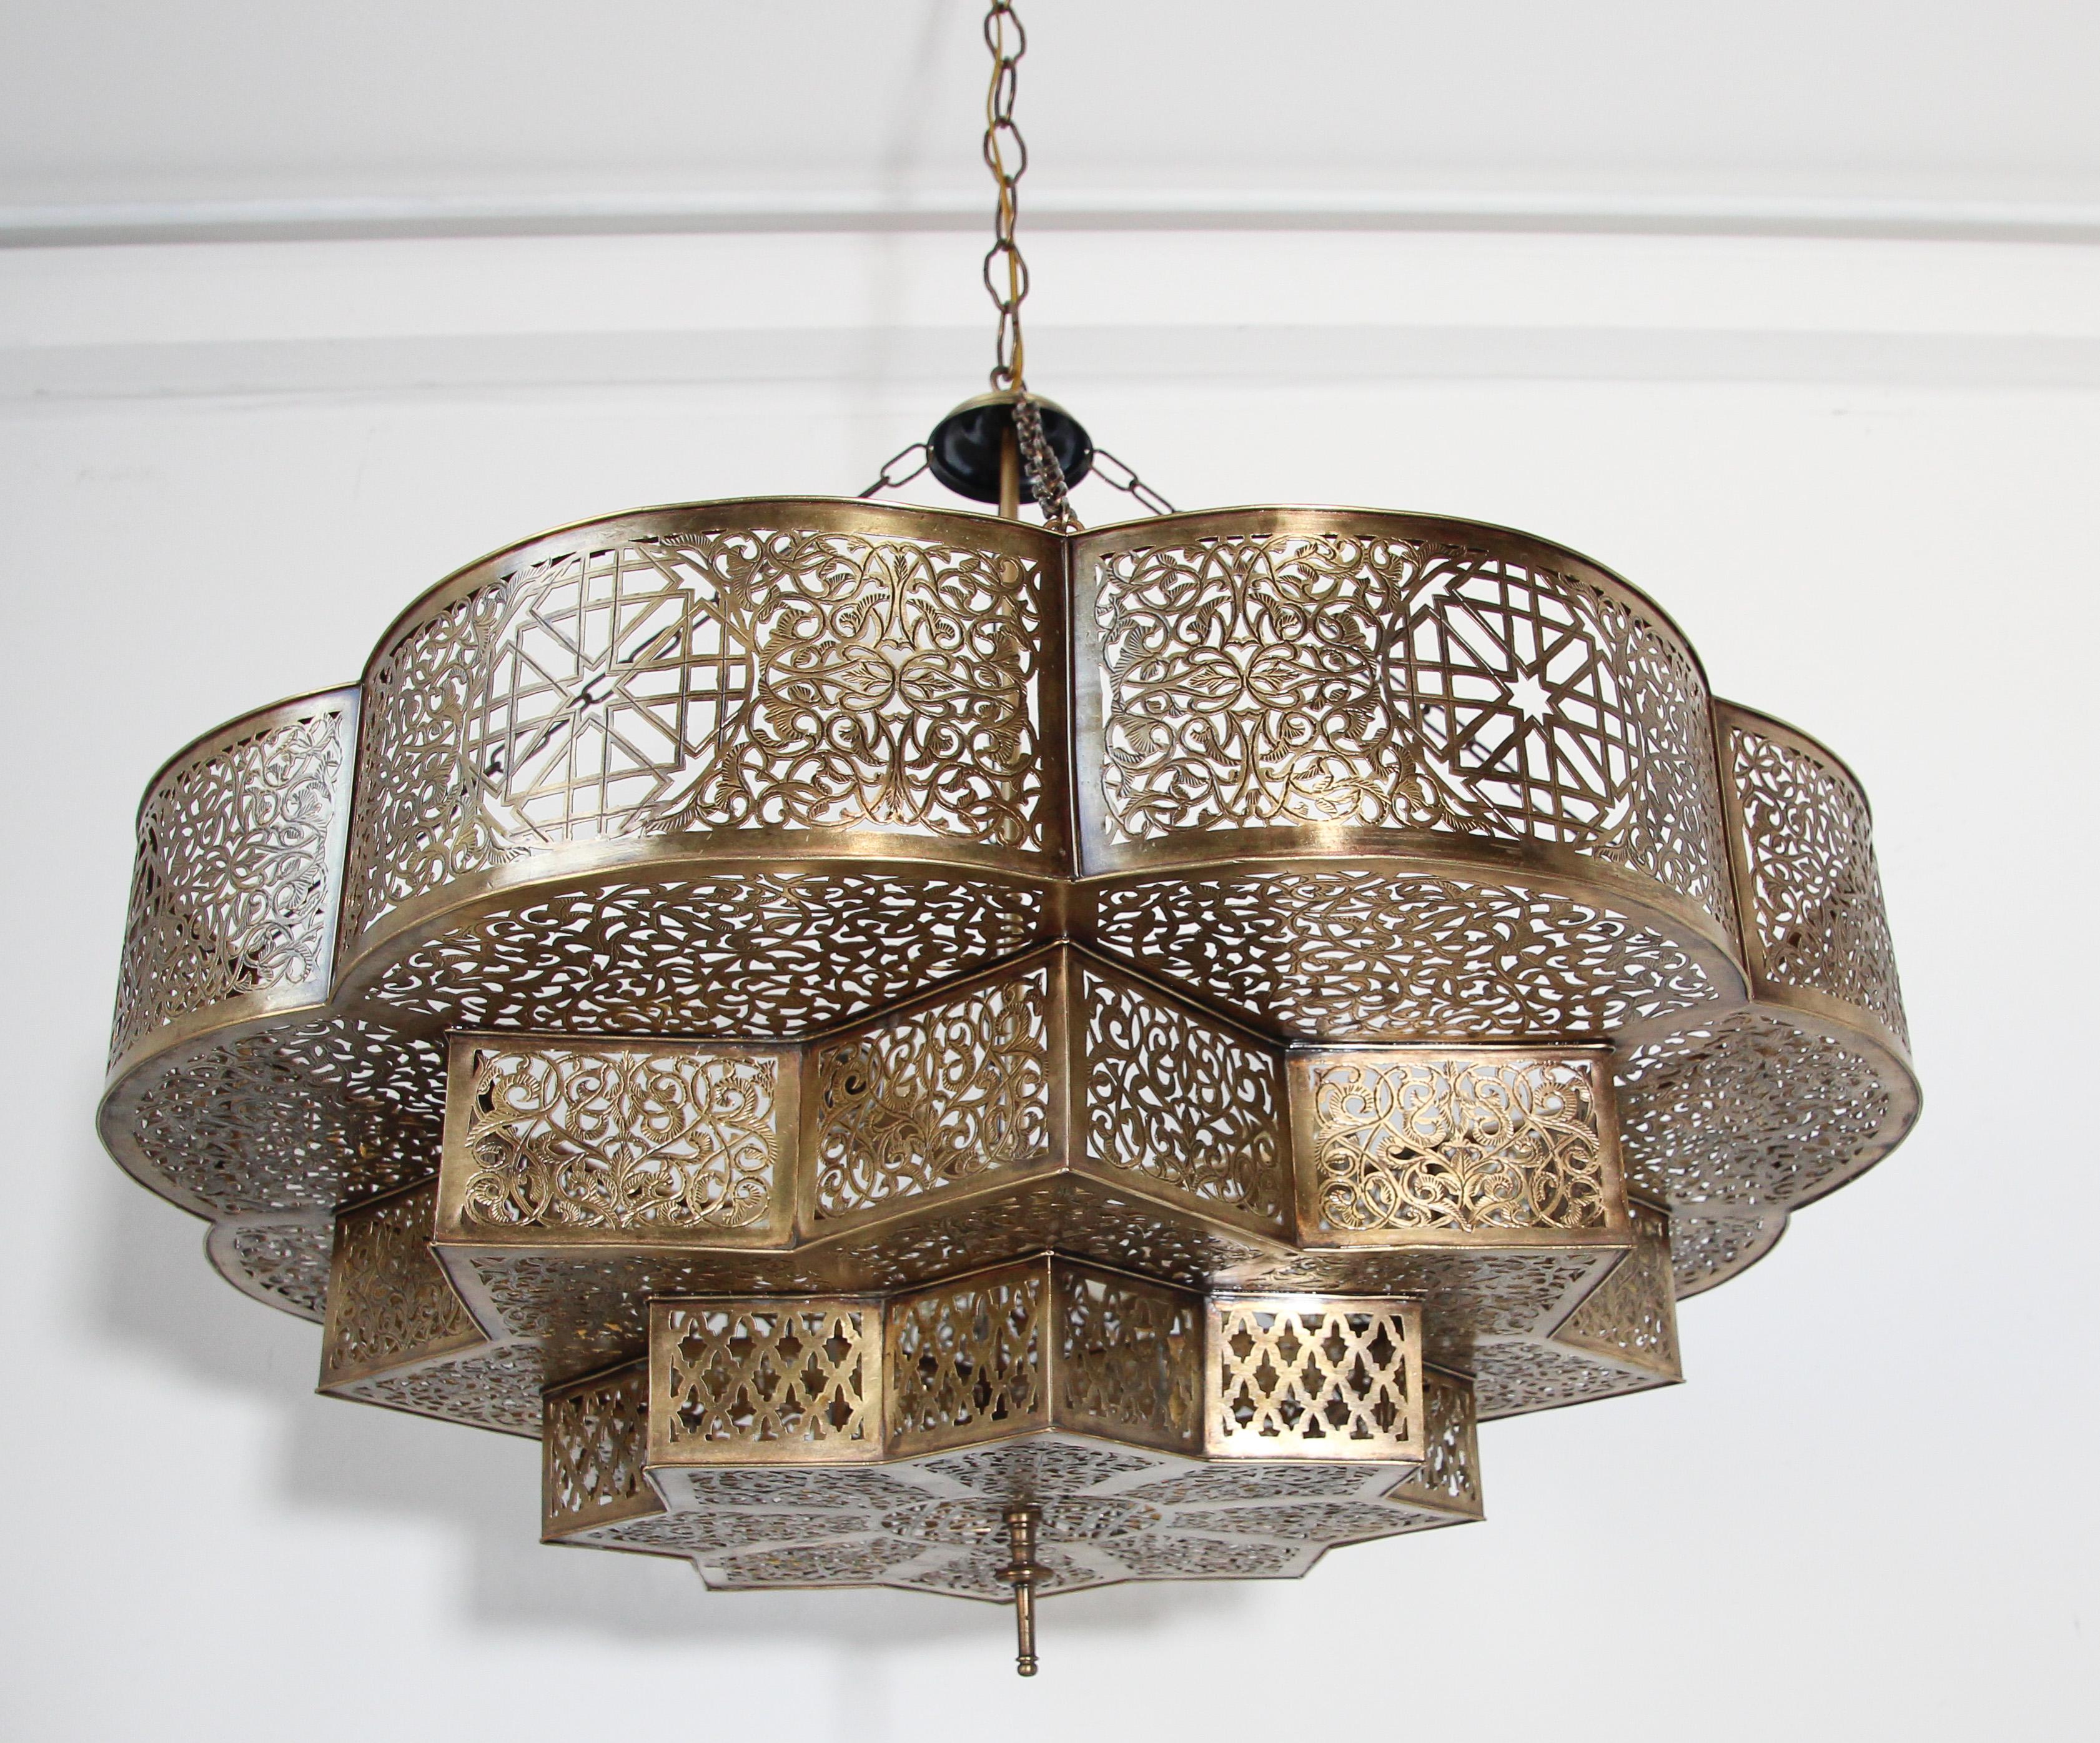 Handcrafted Moroccan Moorish brass Alhambra chandelier.
This Alhambra Moroccan chandelier is made of brass and delicately handcrafted, hand-chase, hand-hammered and chiseled, the brass become a fine art.
Size: Brass body: 30.5 inches diameter x 13